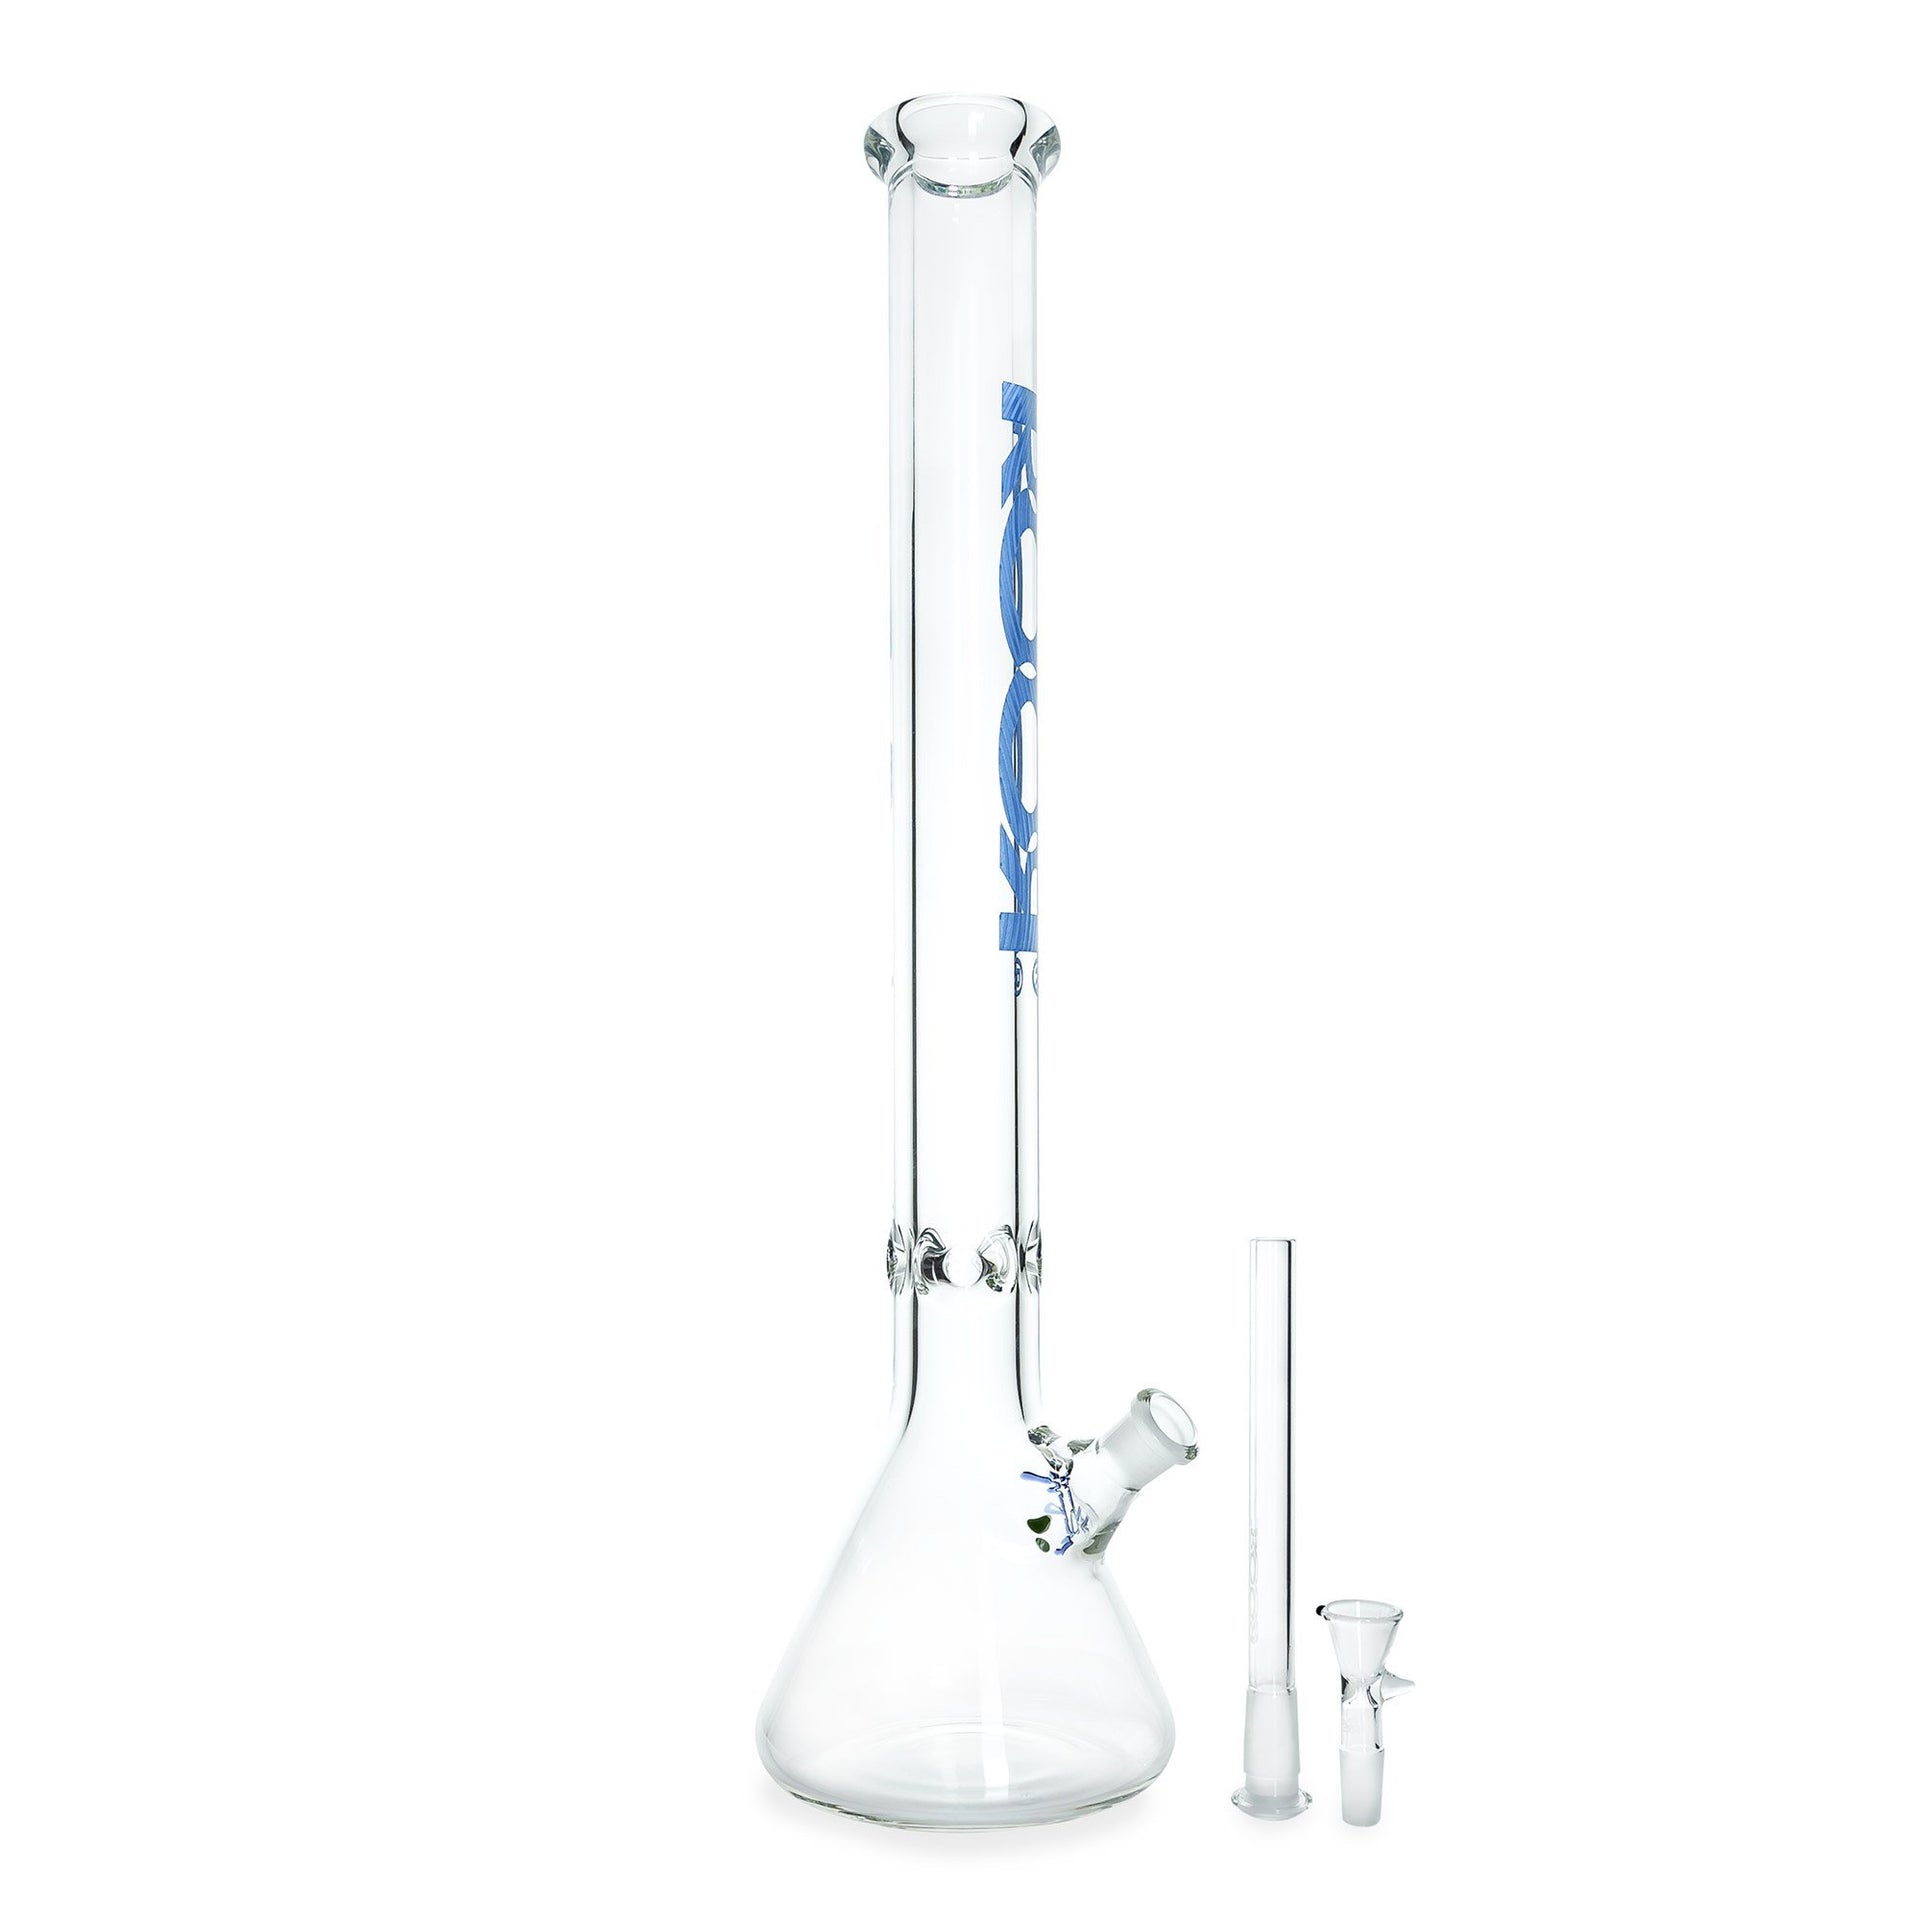 ROOR 24in Beaker 50x9mm - 420 Science - The most trusted online smoke shop.